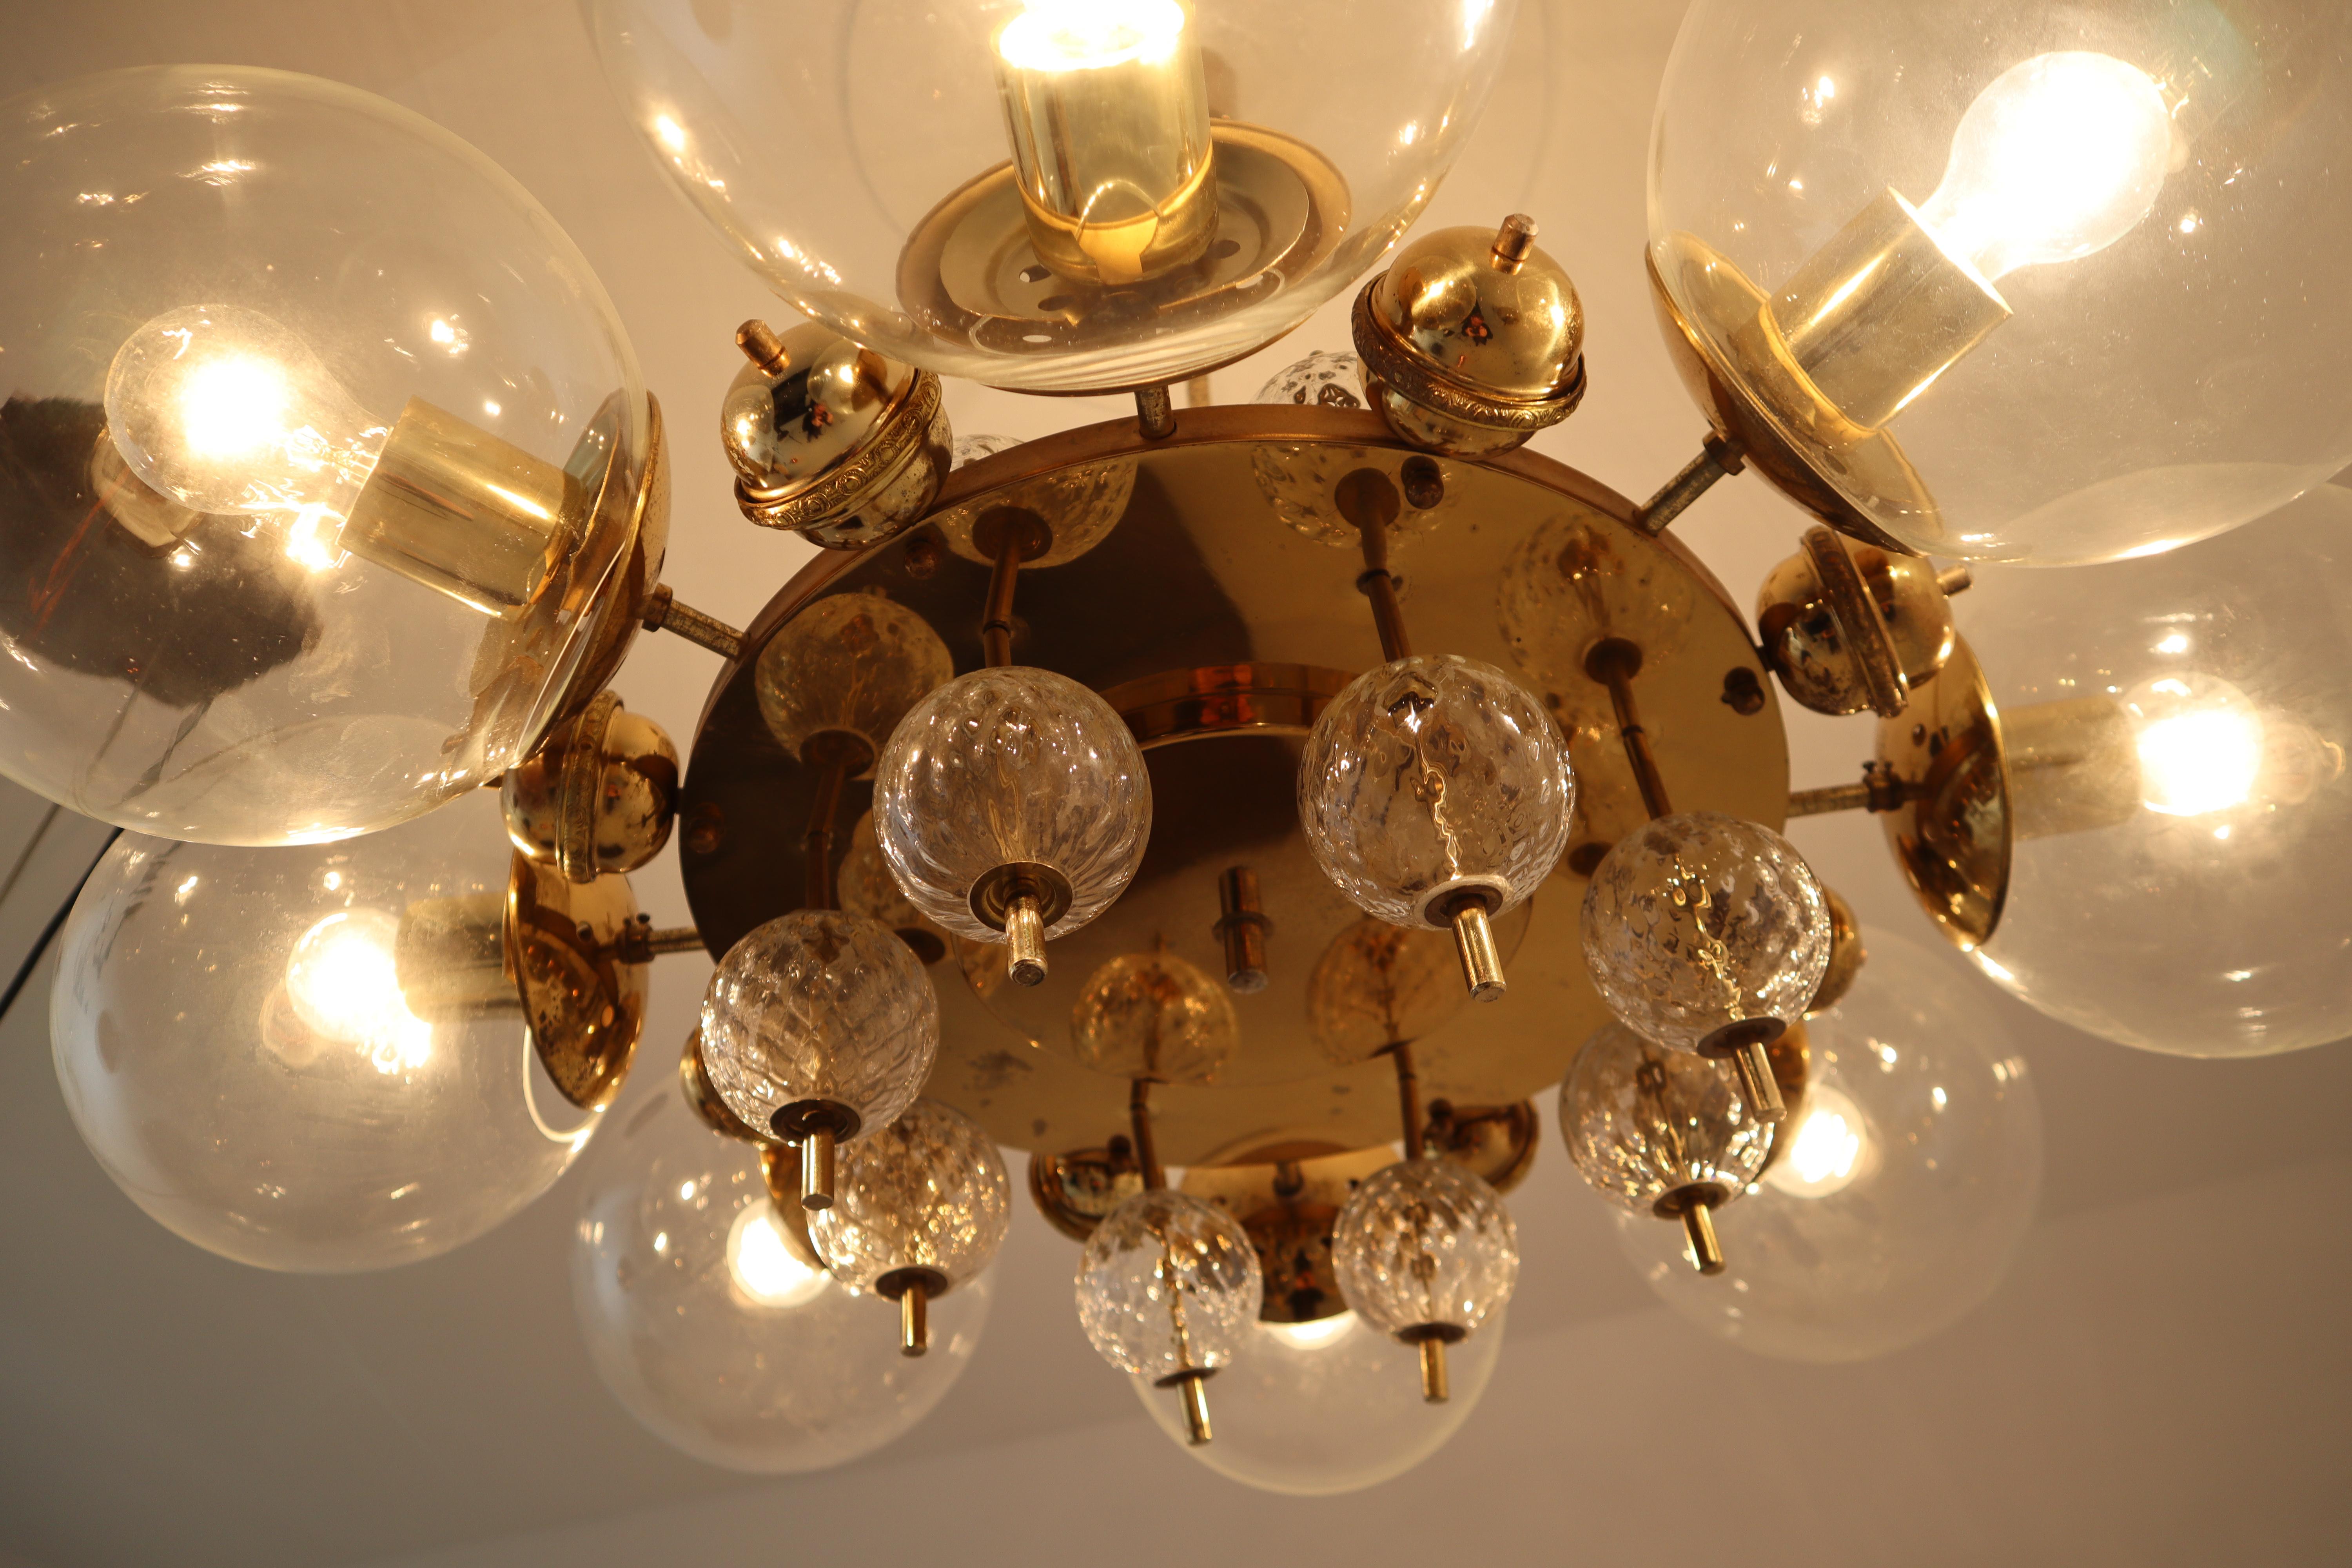 This amazing large brass chandelier was produced in Europe in the 1950s. A spirited and chic design set chandelier with brass fixture and hand blown glass. The chandelier with brass frame consist of eight lights, formed in a circle, with glass